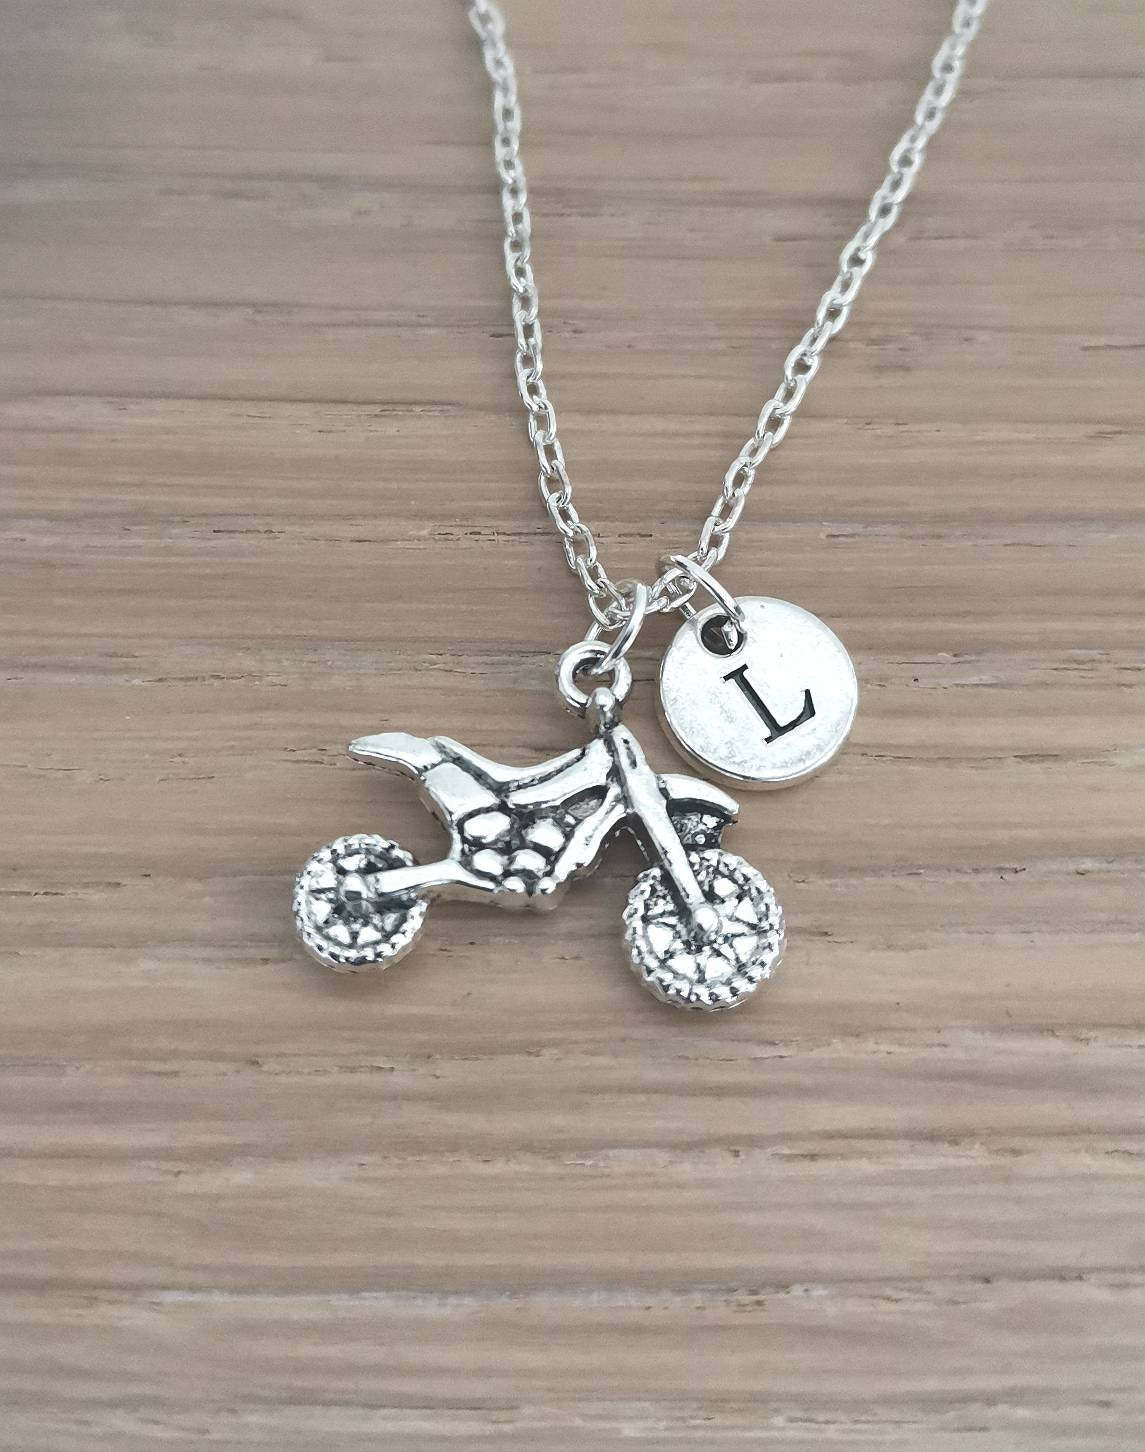 Motorcycle necklace, Motorbike gifts, Motor cycle necklace, Motor bike Jewelry, Motorcyclist gift, Gift for Motorcyclist, Bike jewelry